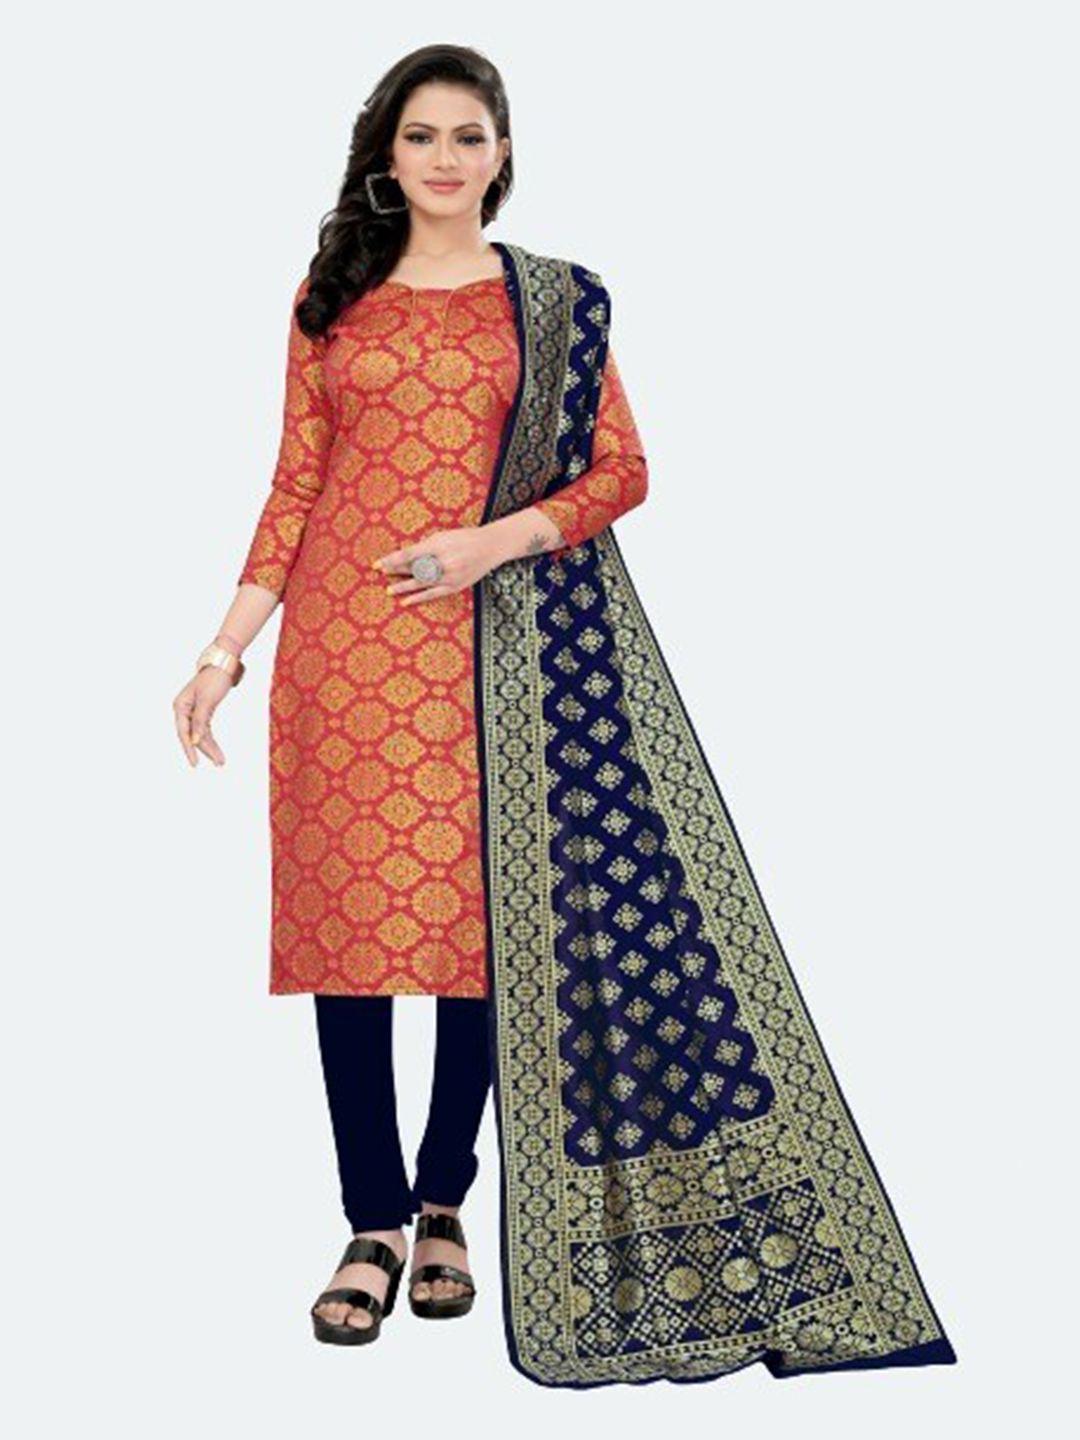 morly women red & navy blue dupion silk unstitched dress material